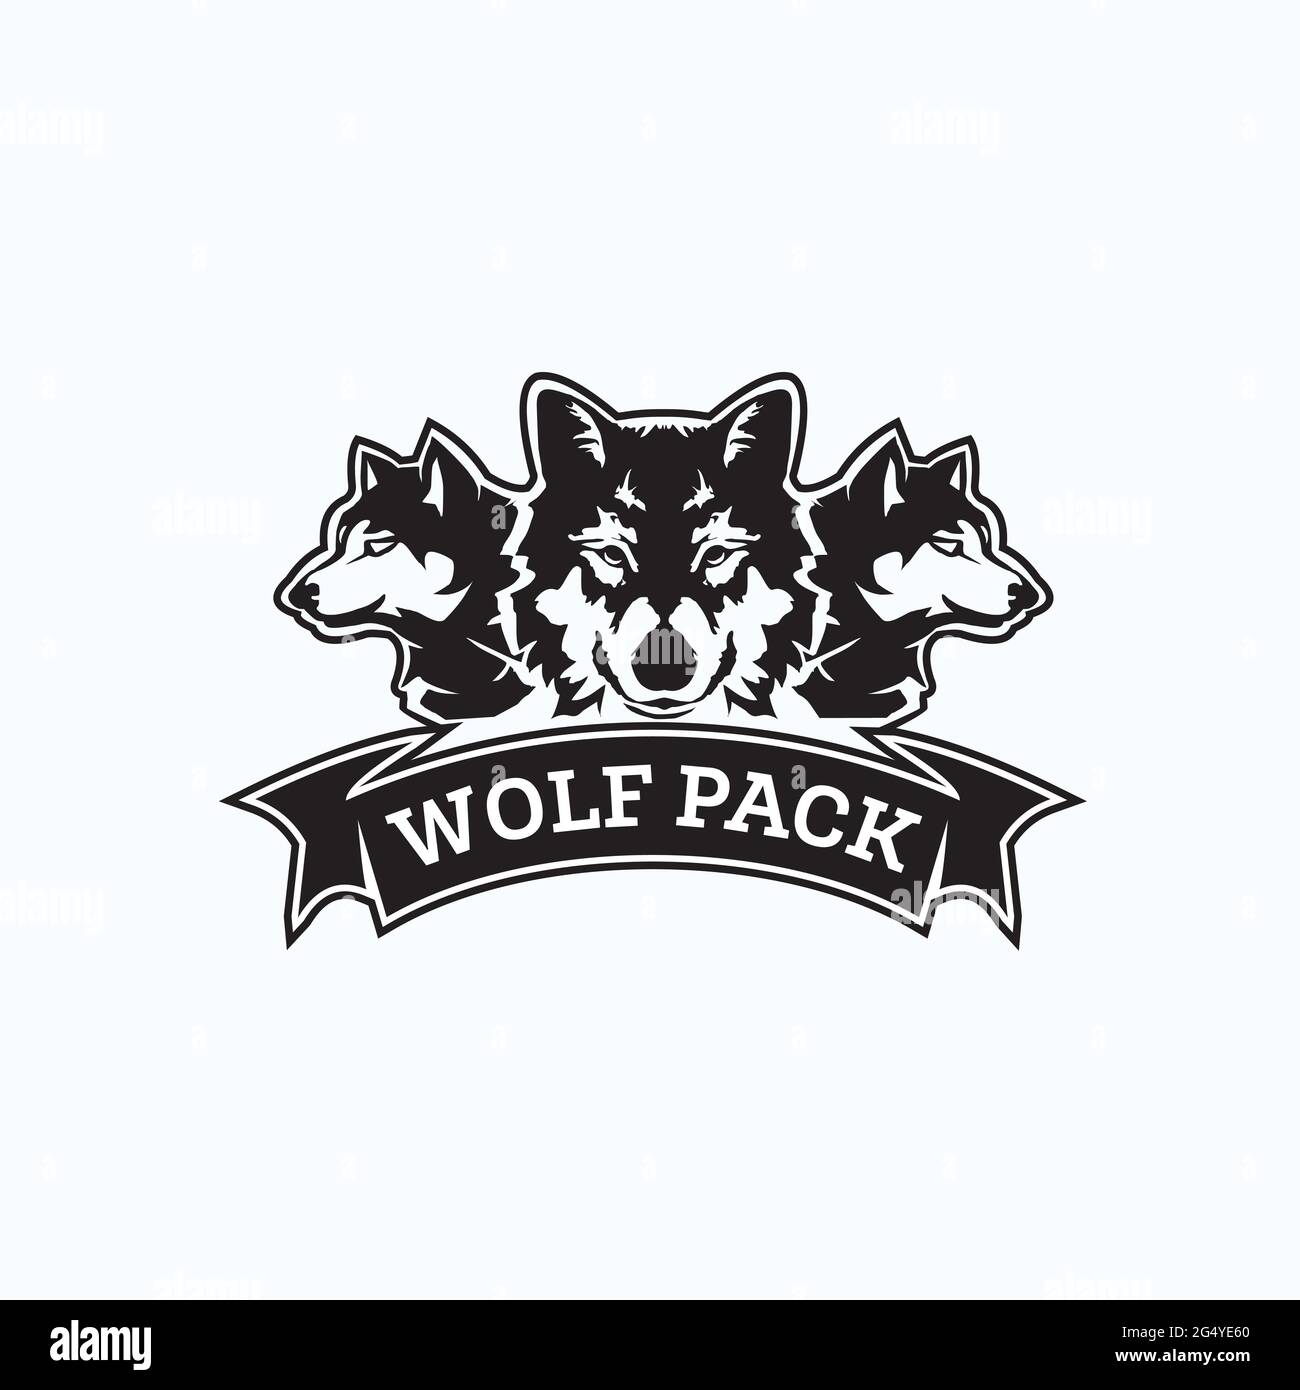 wolf pack exclusive logo Stock Vector